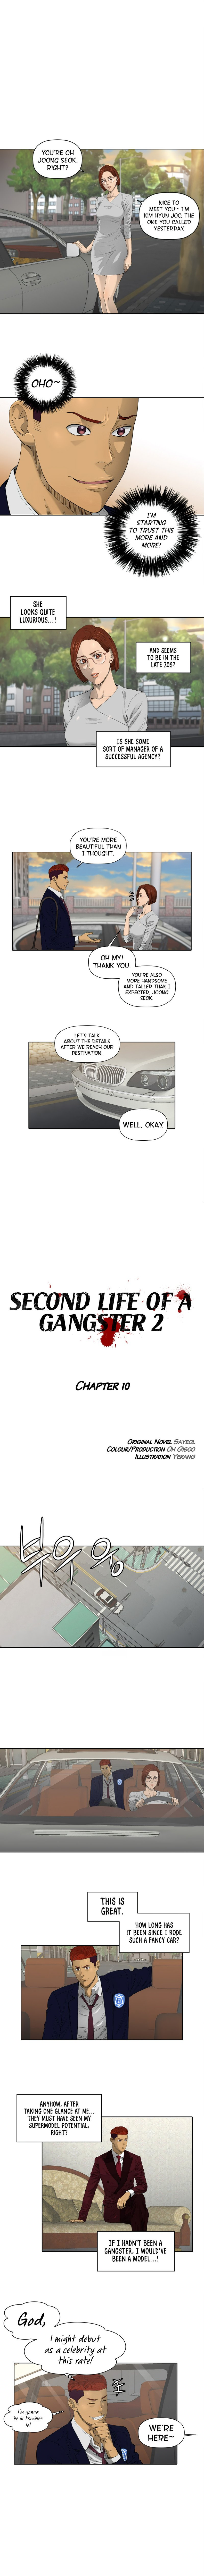 second-life-of-a-gangster-chap-62-1